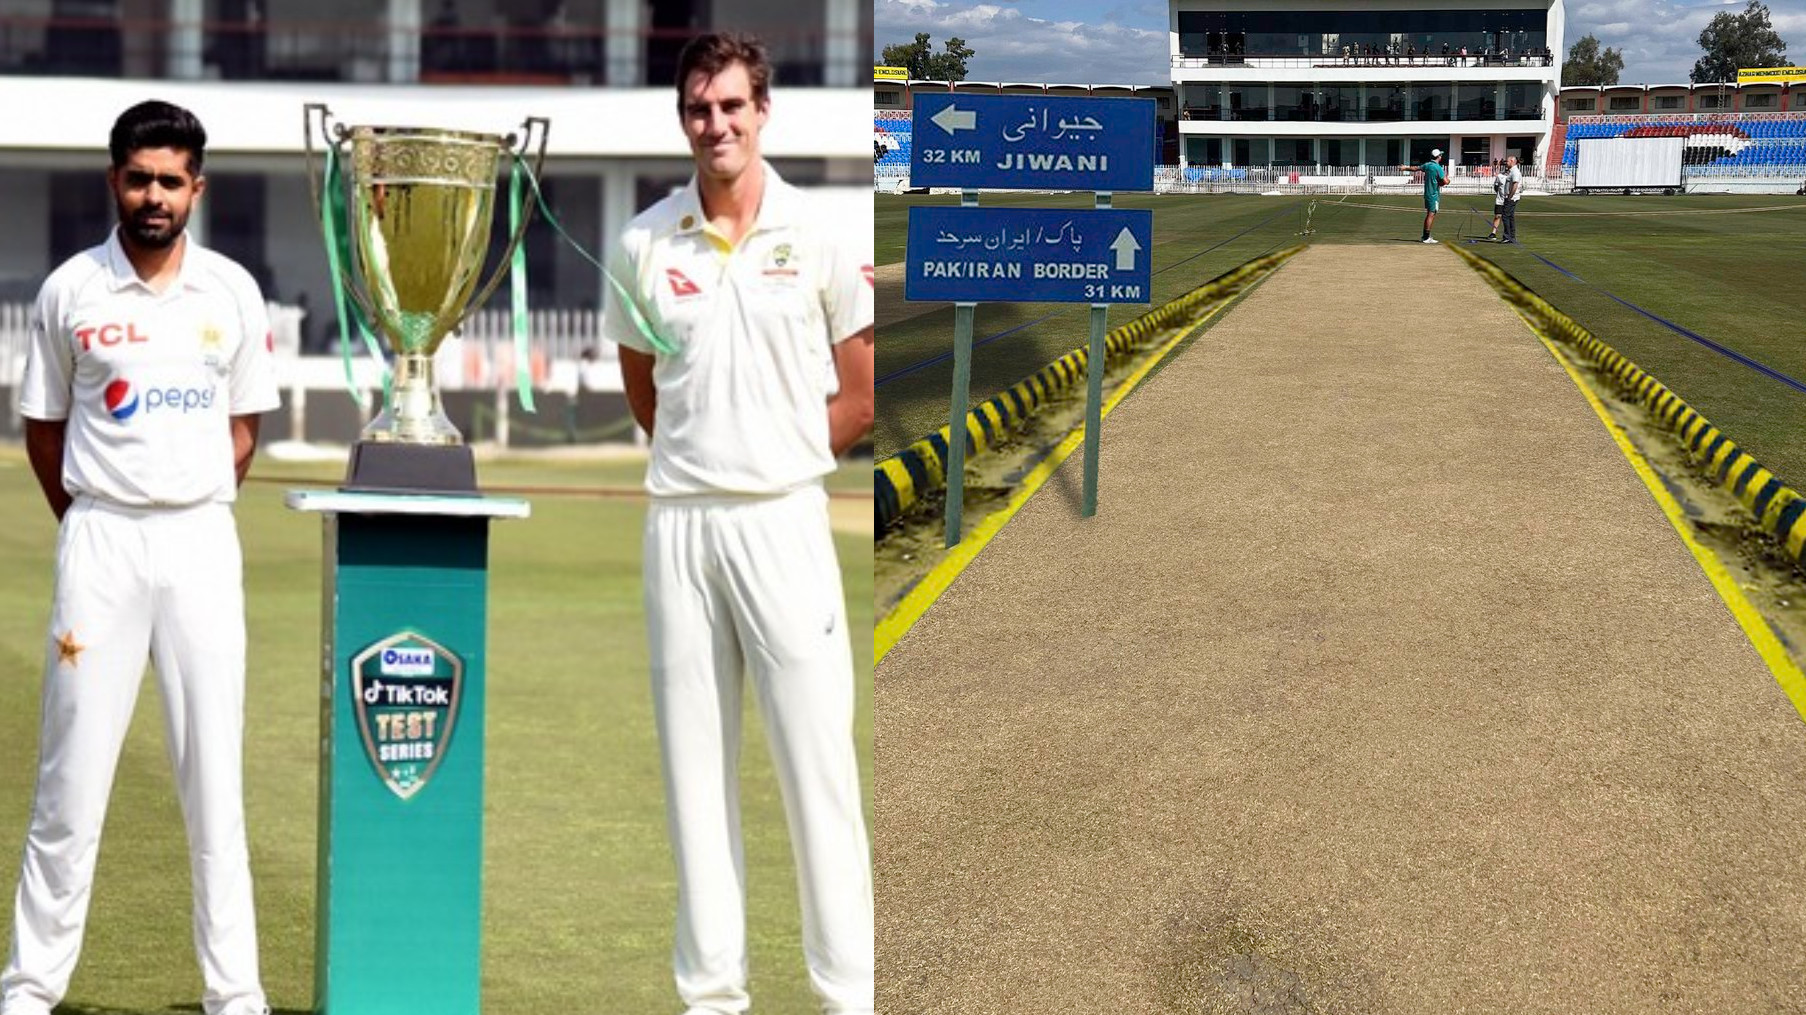 PAK v AUS 2022: Fox Sports shares hilarious photo of Rawalpindi pitch with road signs and footpath